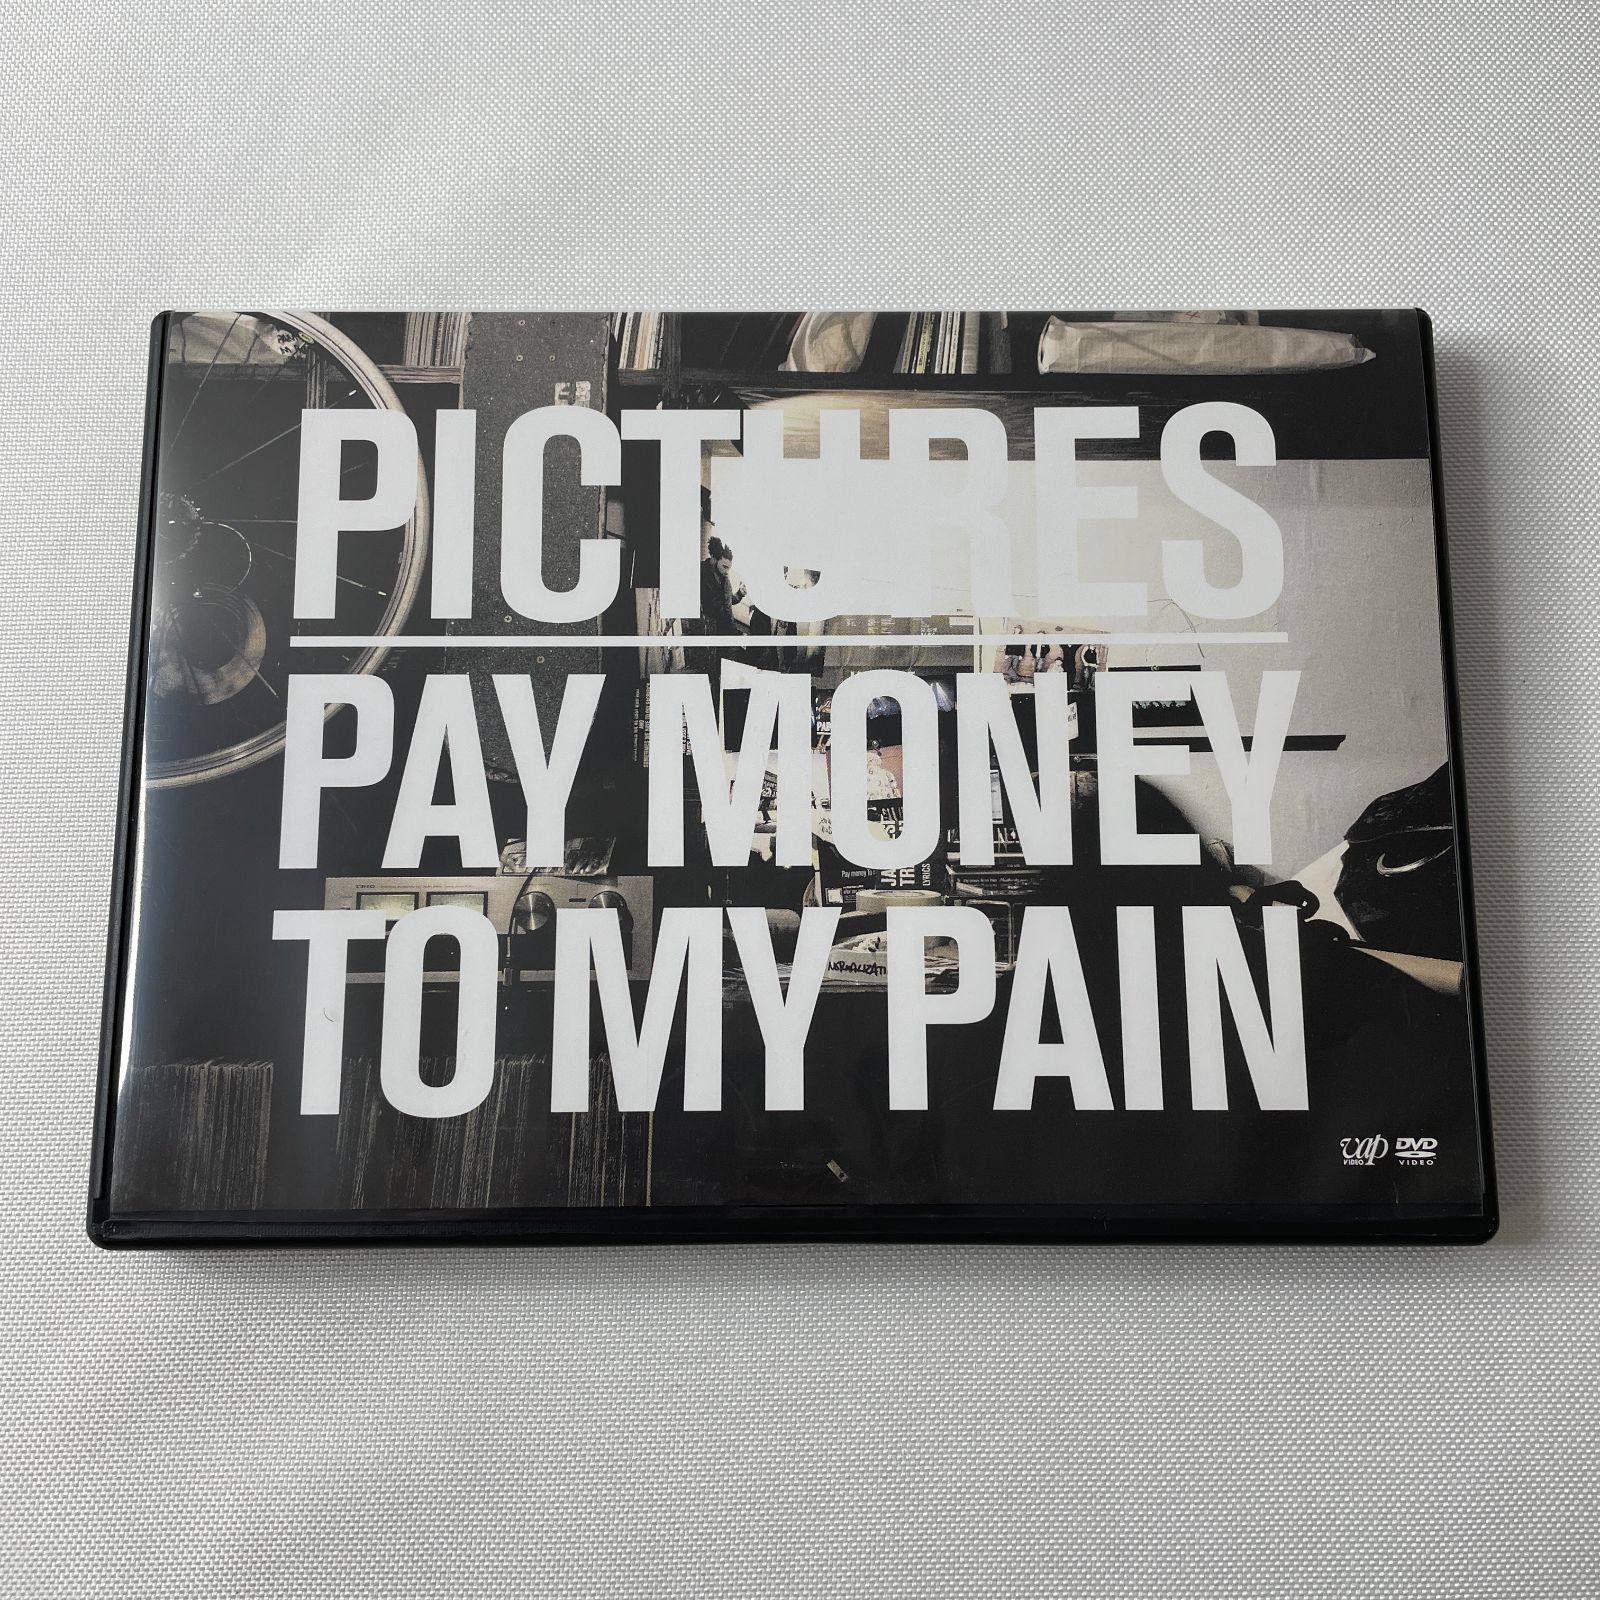 【Pay money To my Pain / Pictures〈2枚組〉】DVD P.T.P ジェシー 再生確認済み 見本盤